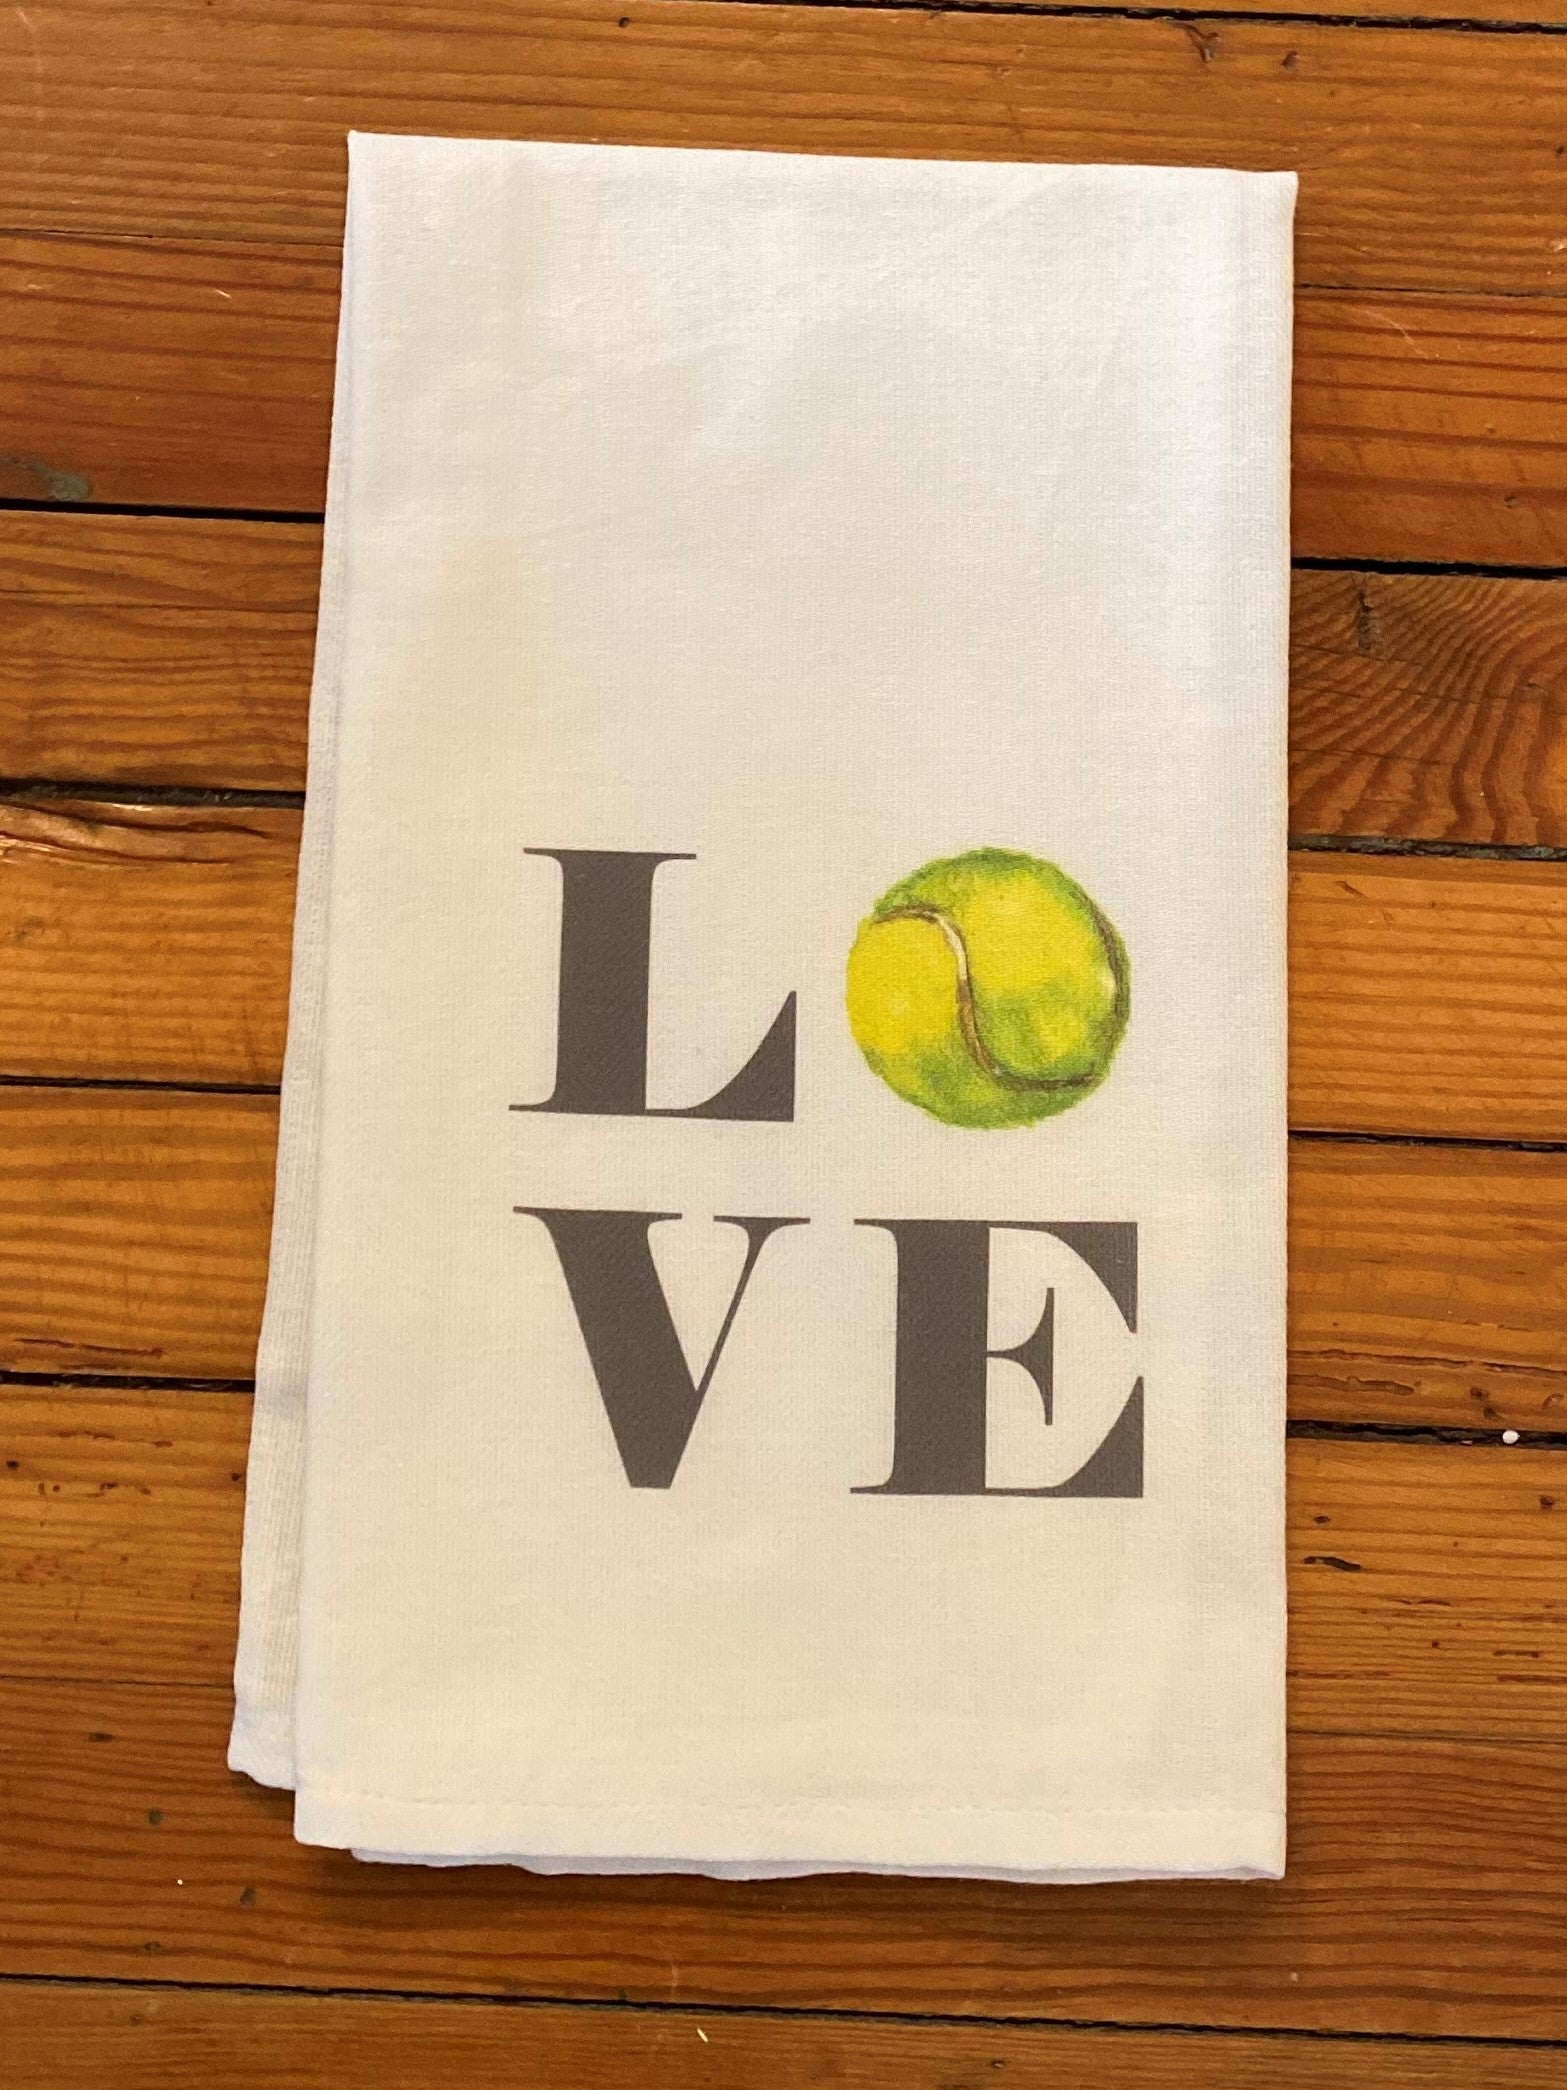 What fun are these tea towels with these cute tennis sayings! It's always great to give your partner, captain or tennis friend a tennis-themed gift. These tea towels are so fun and just the right thing!  100% Cotton Dimensions 20x25 inch